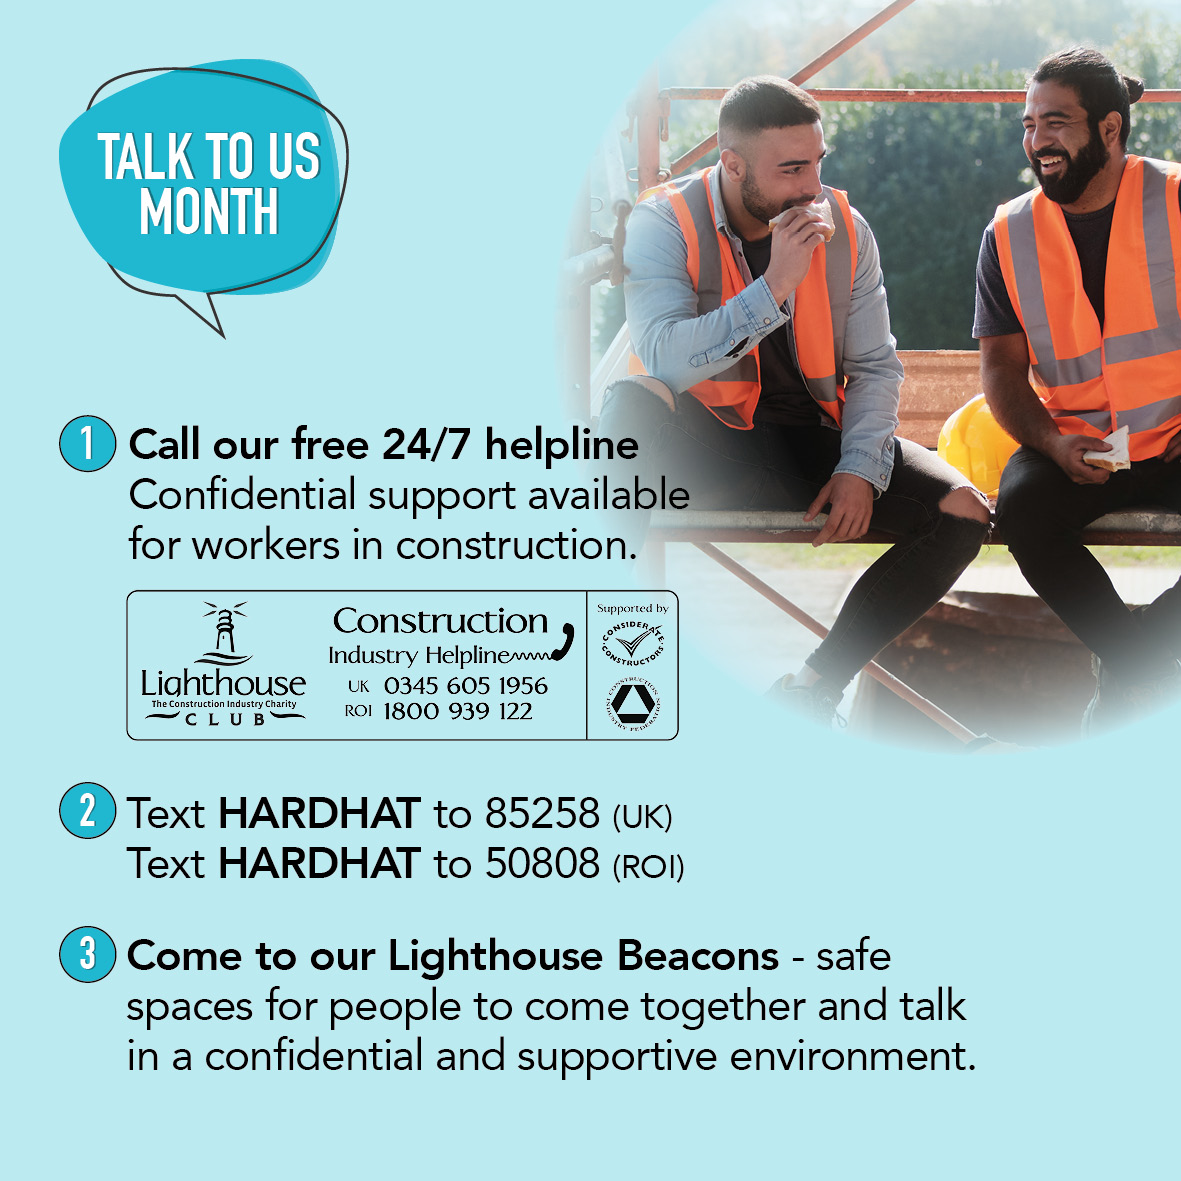 Lighthouse construction charity urges workers to 'Talk to Us'